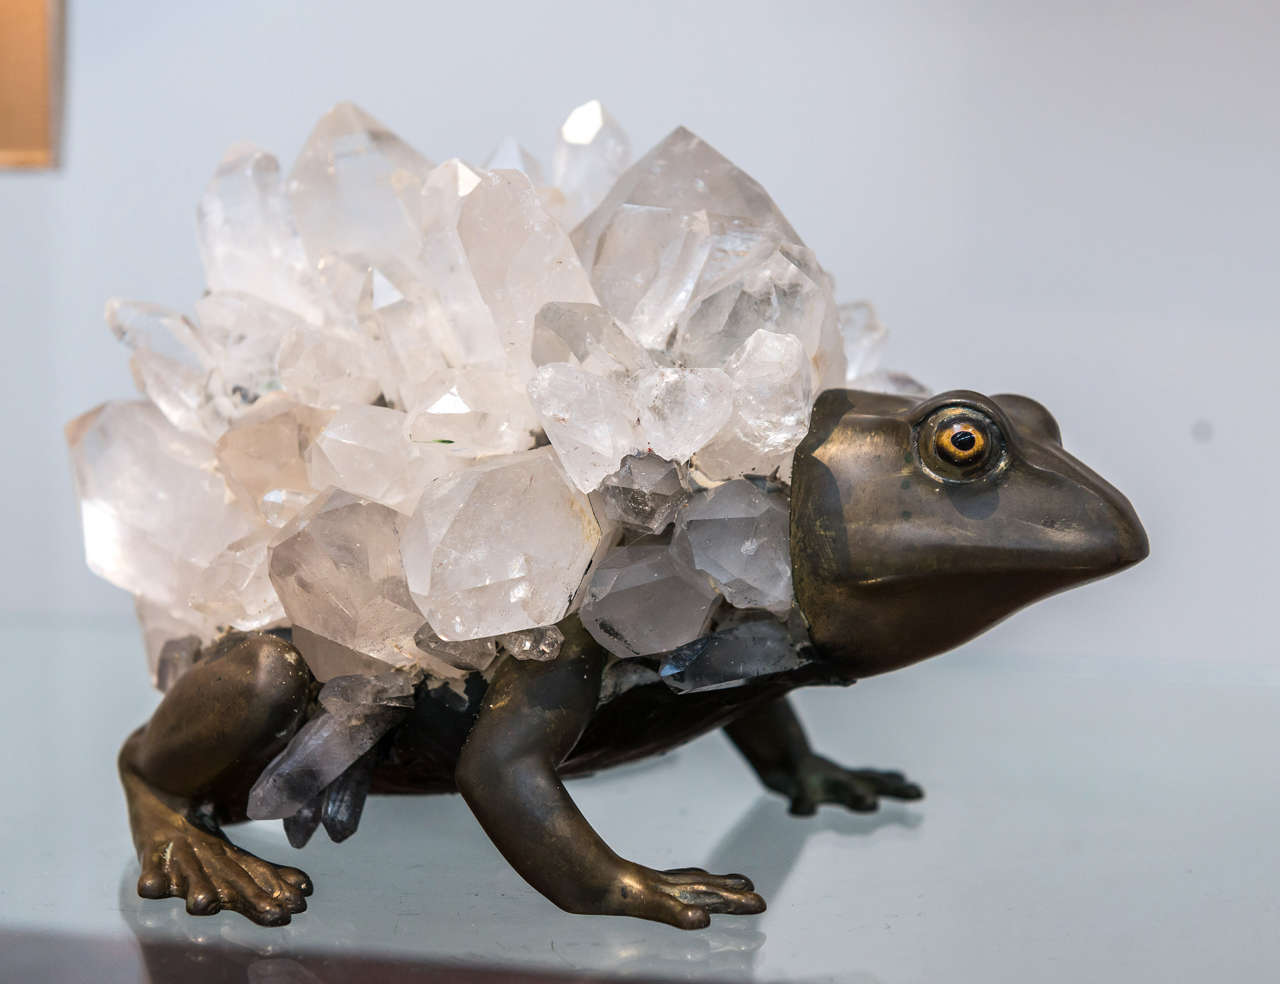 A captivating and unusual sculpture of a frog by Anthony REDMILE (England 20th century) in patinated bronze, overlaid with quartz.
Circa 1970
Label on the bottom:  REDMILE OBJECTS, 73 Pimlico Road, London, England